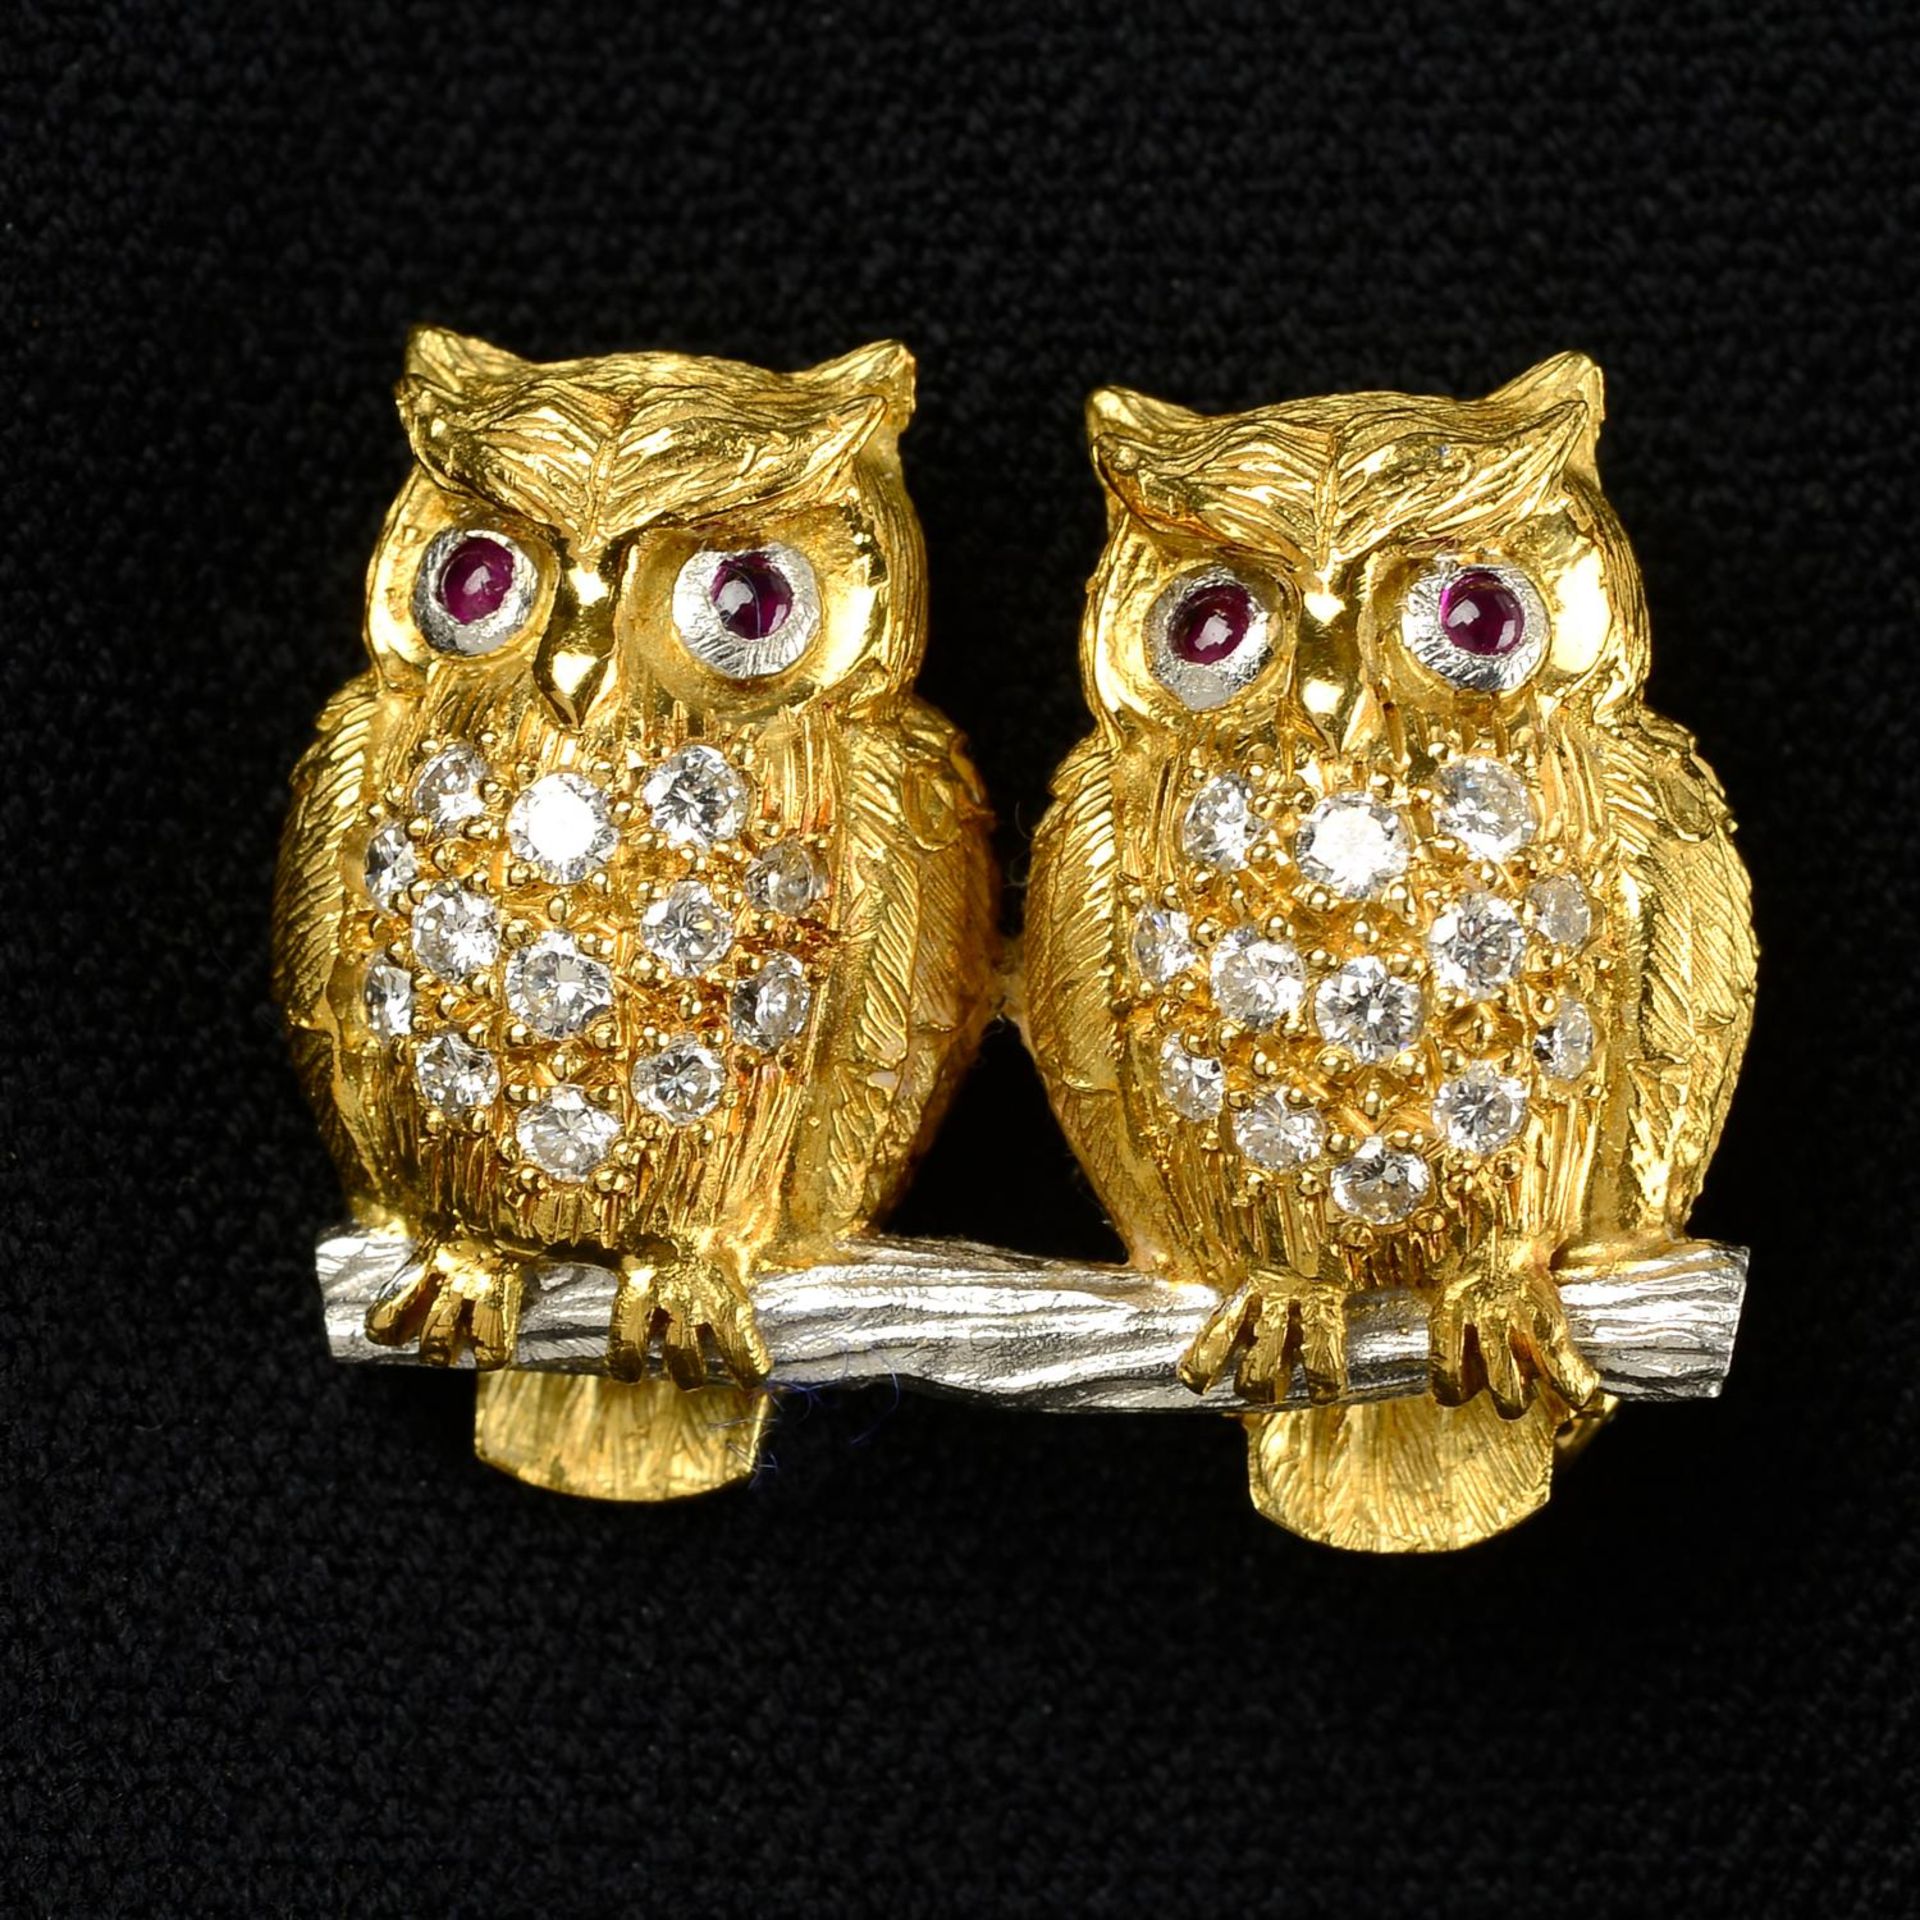 A bi-colour 18ct gold brilliant-cut diamond brooch, depicting a pair of owls, with ruby eyes, by E.